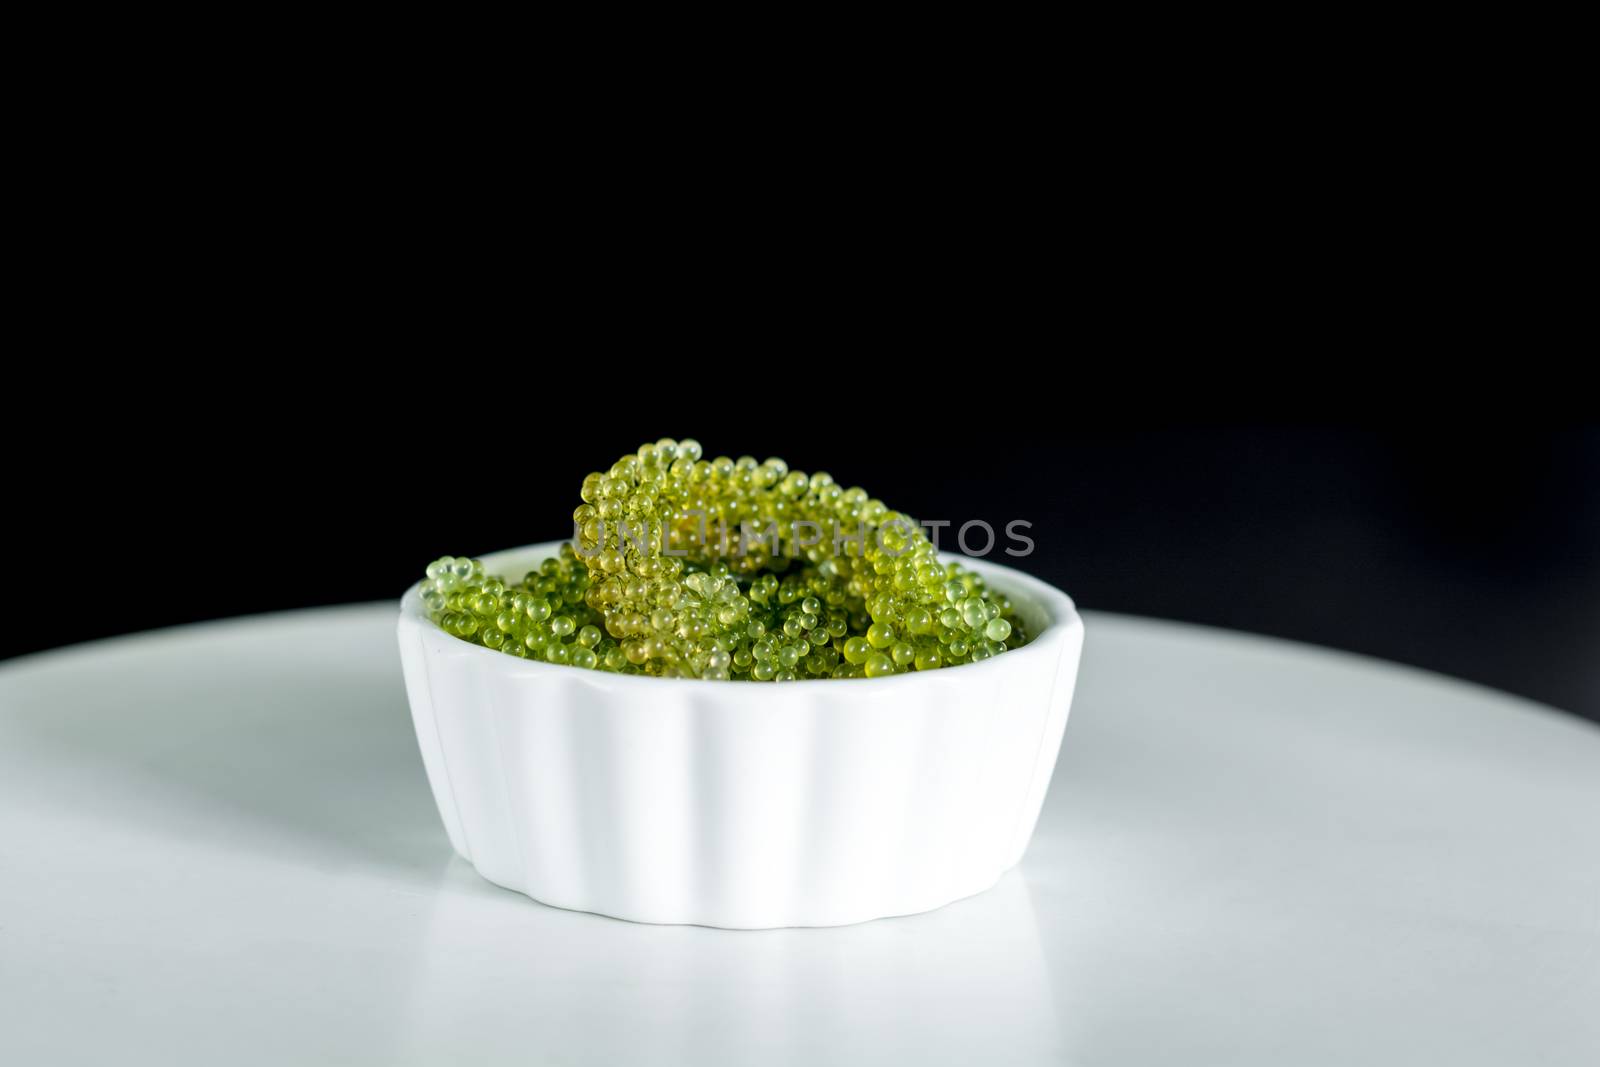 Fresh sea grapes or caviar seaweed in white bowl on black background. Healthy food concept.